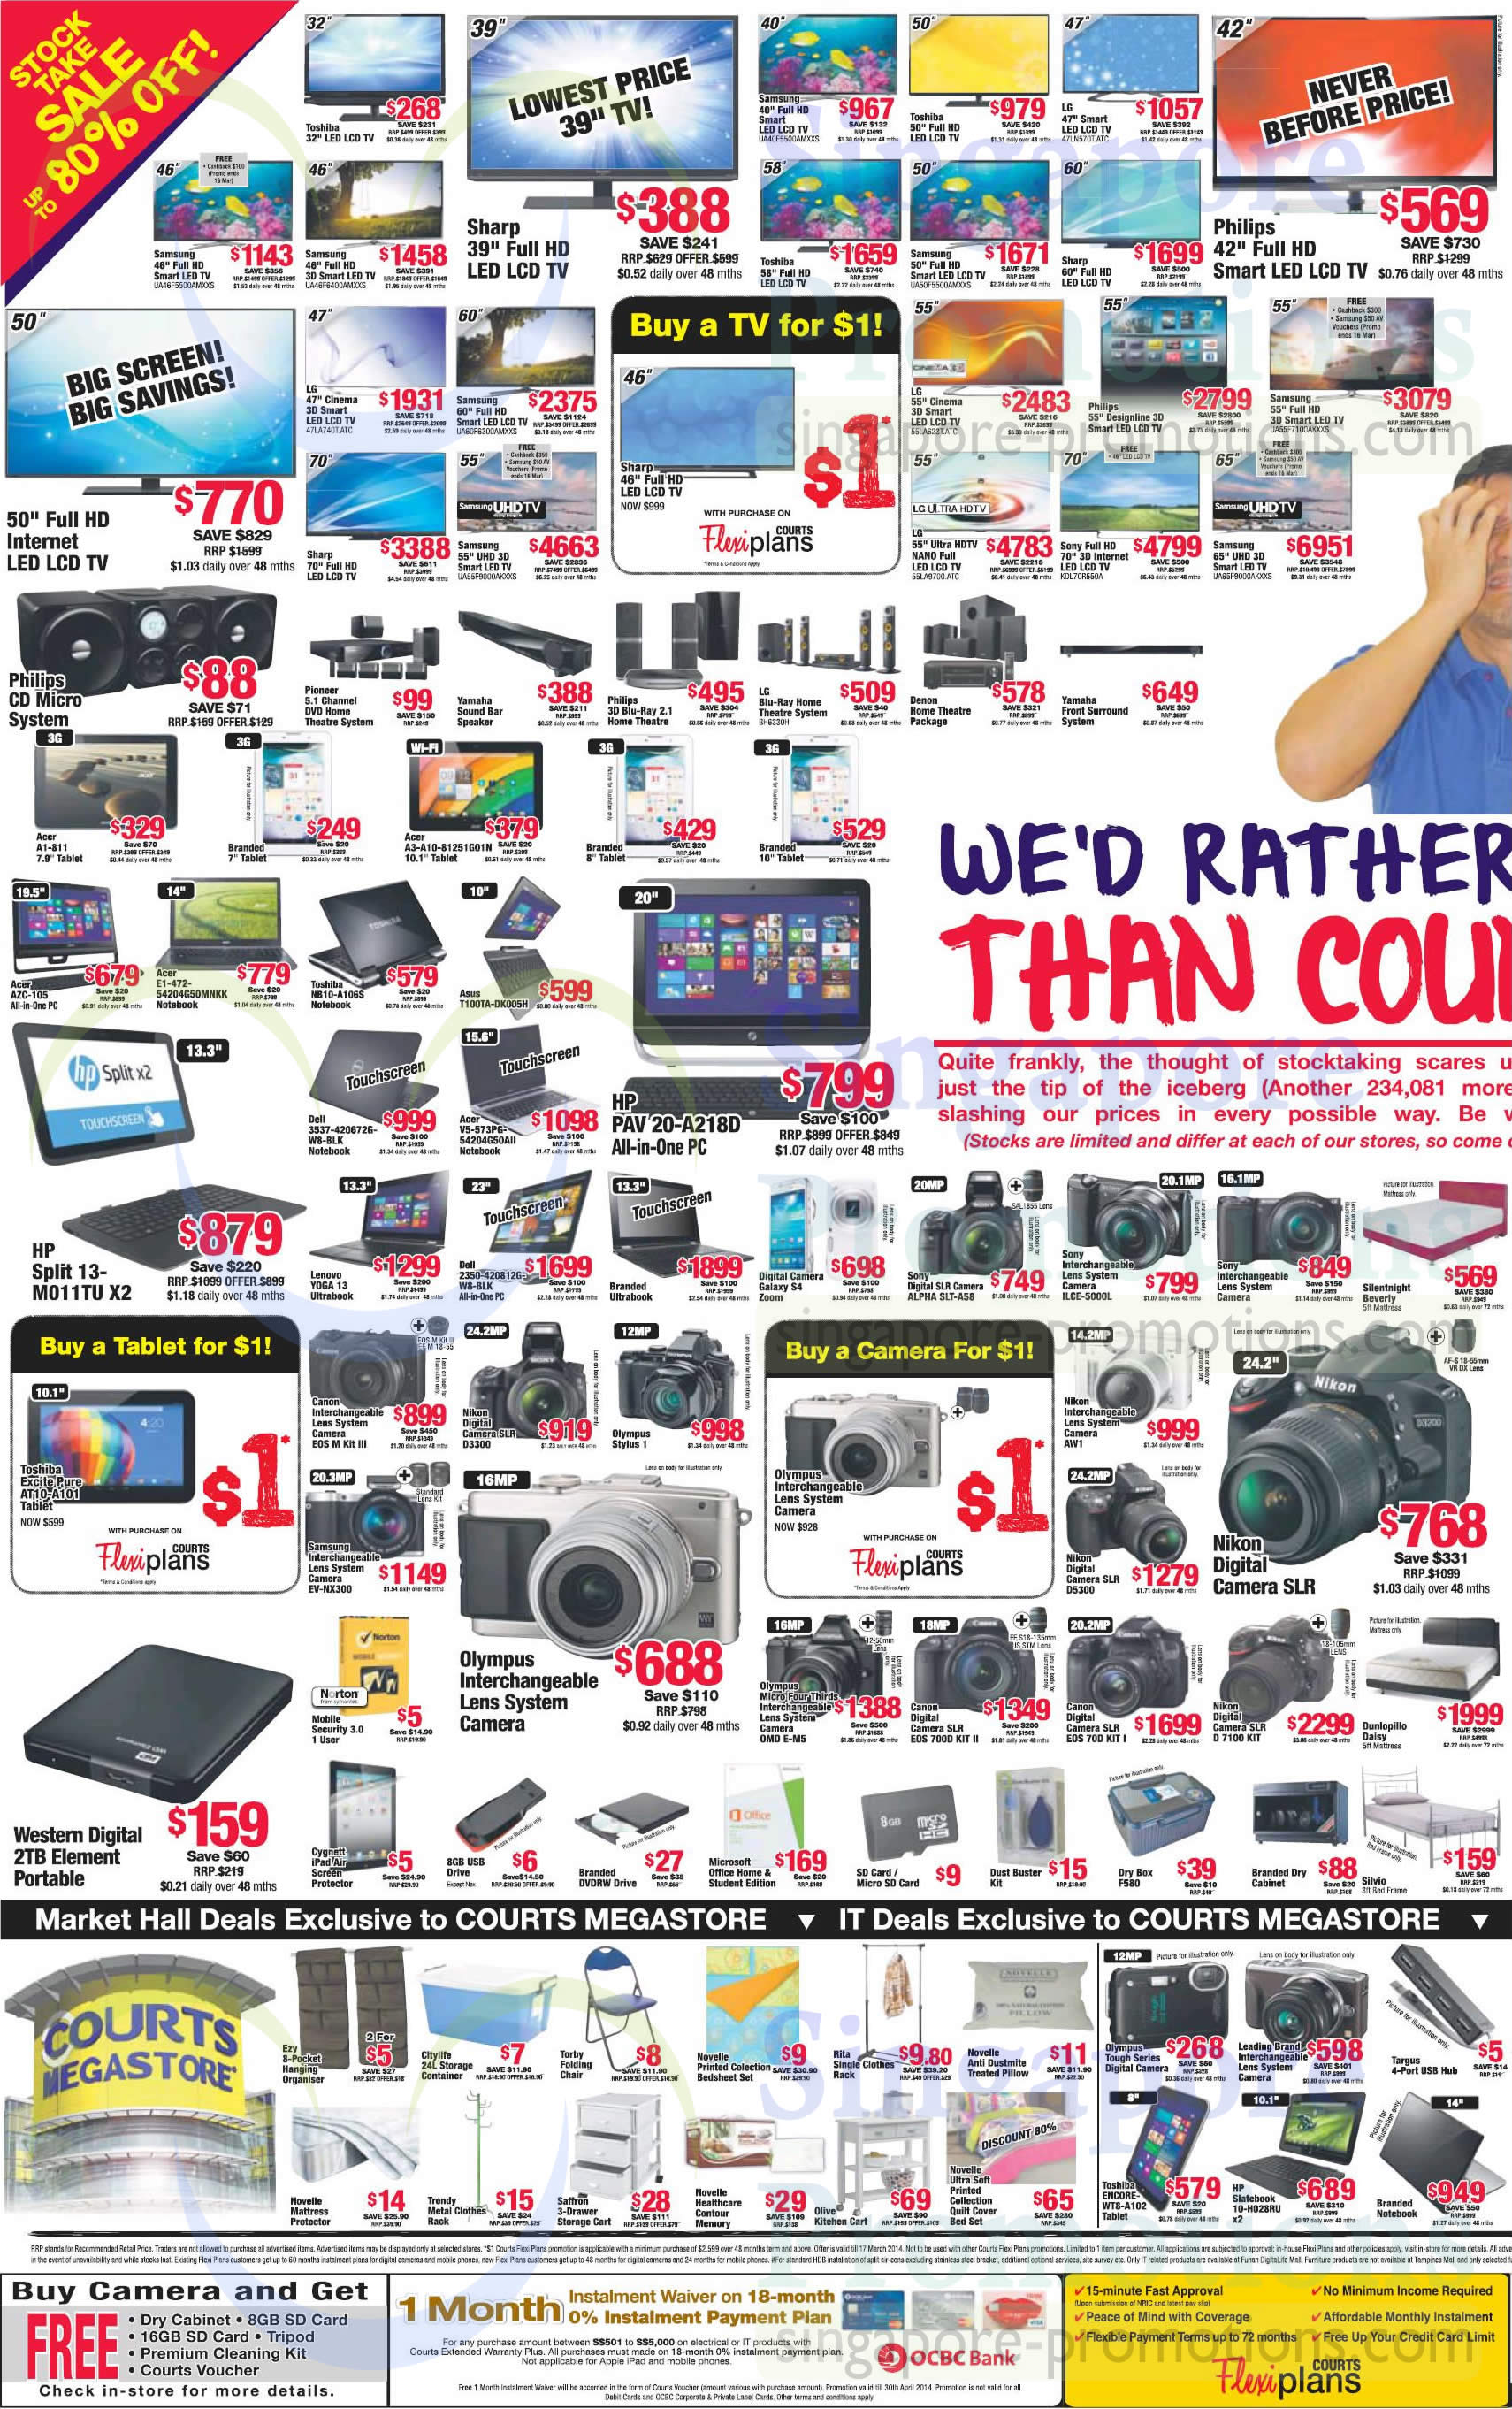 Featured image for Courts Stock Take Offers 15 - 17 Mar 2014